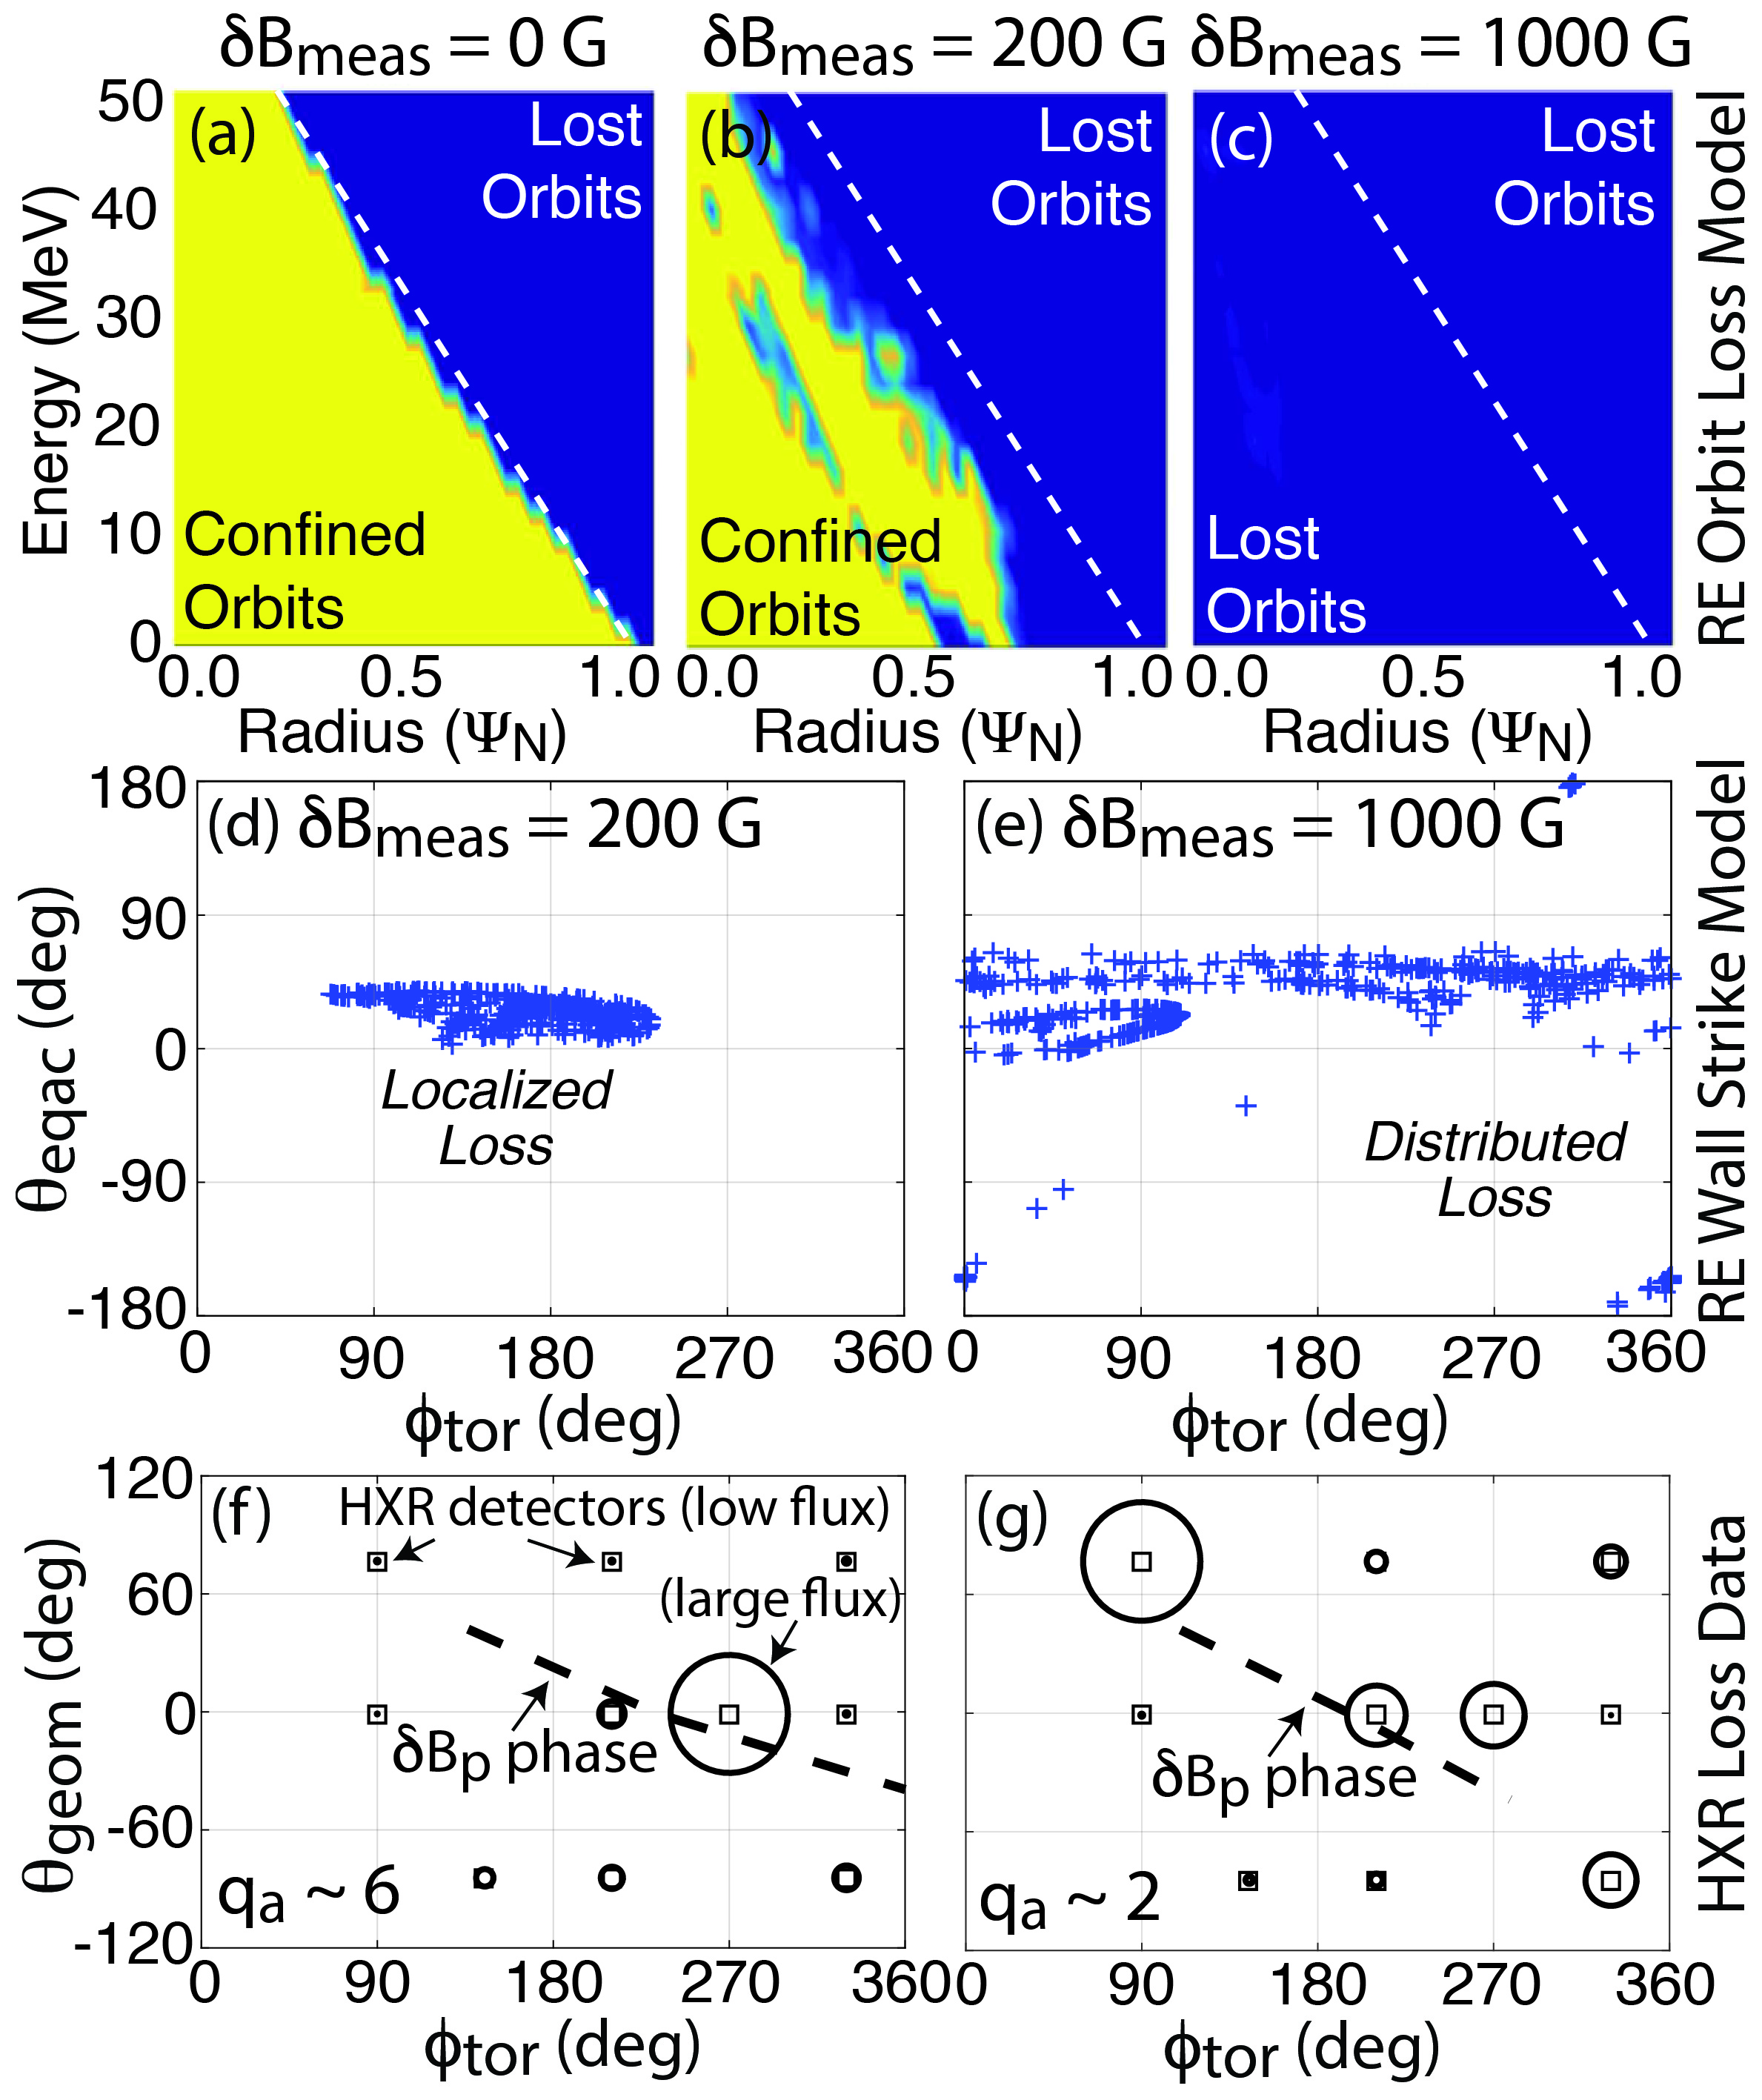 MARS-F modeling of DIII-D finds (a-c) more orbits are lost as delta-B increases and (d-e) a larger wetted area over which REs are lost, consistent with (f-g) more distributed HXR loss data at low qa (Ref. 1)(Ref. 2).